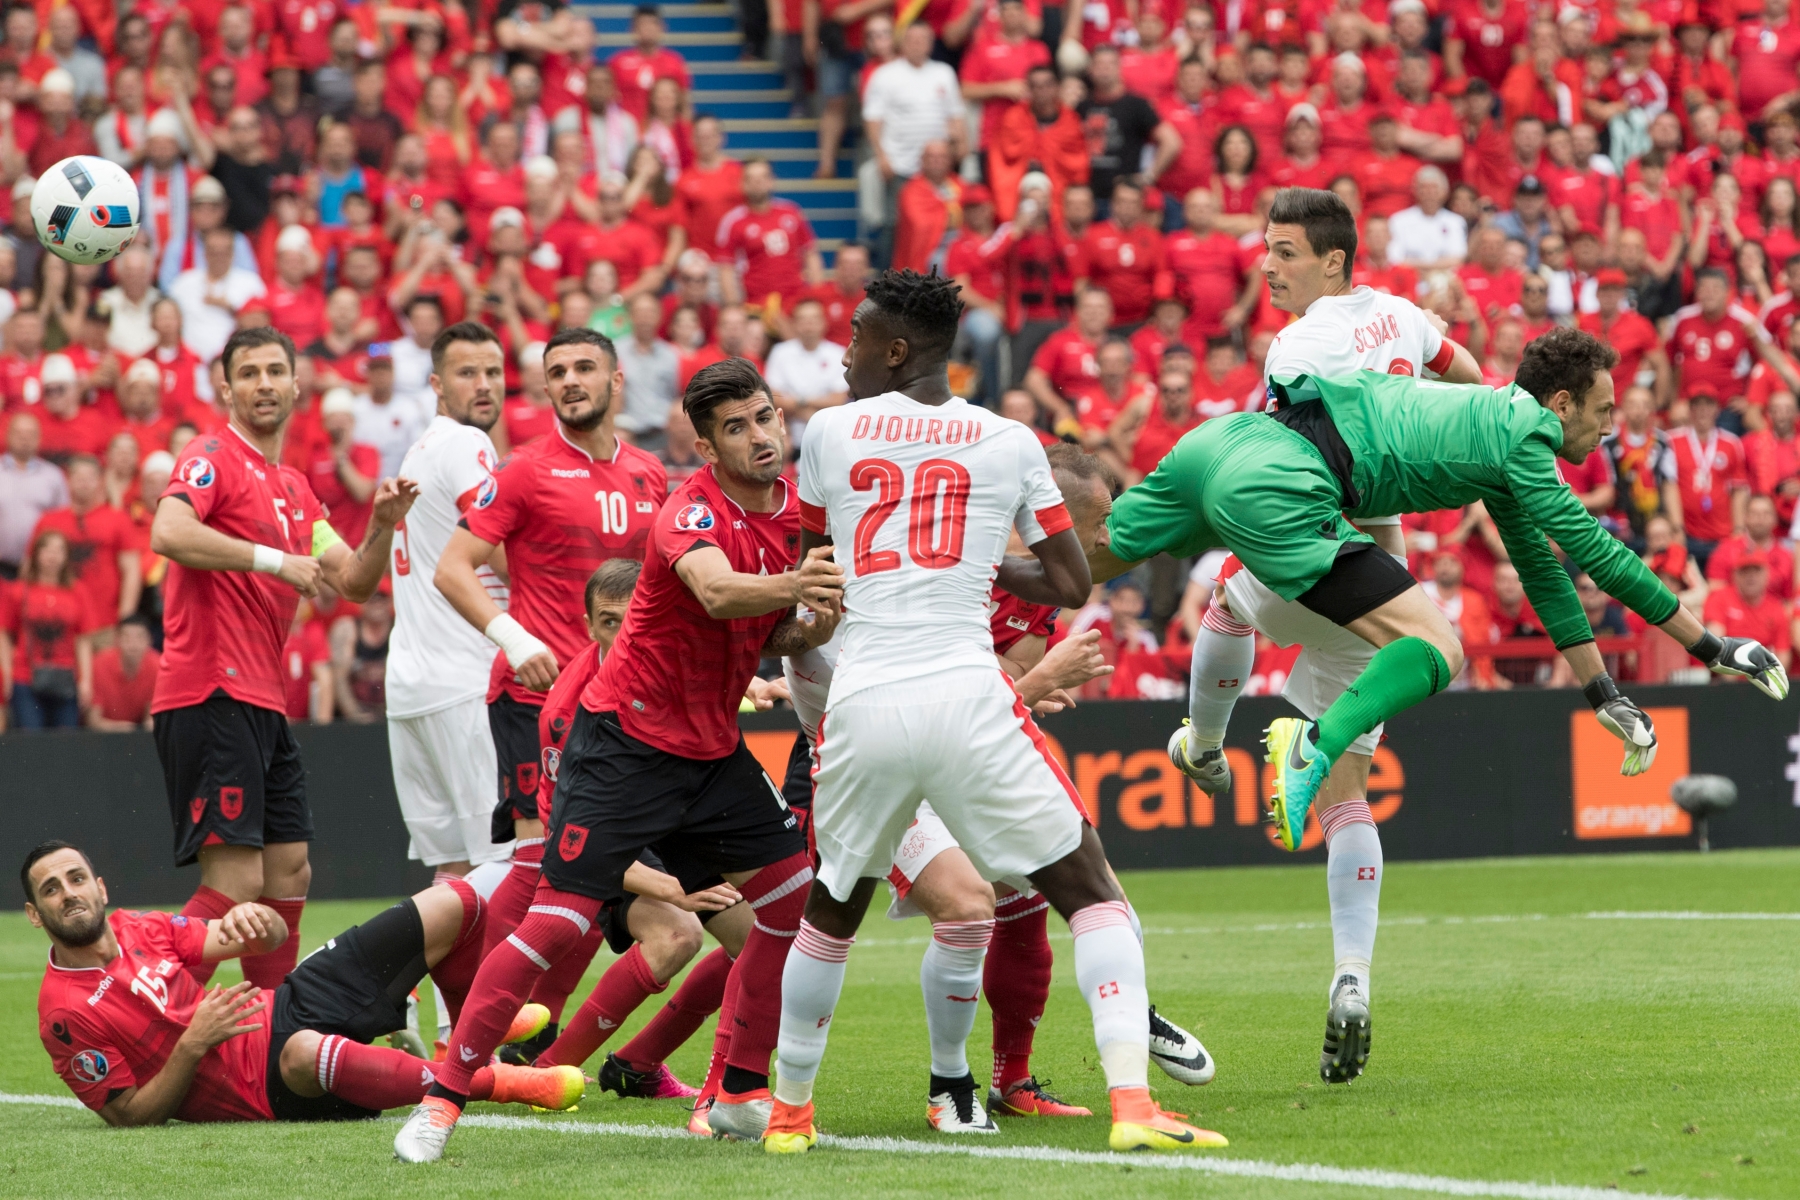 Swiss defender Fabian Schaer, right in white, scores the first goal next to Albania's goalkeeper Etrit Berisha, right in green, during the UEFA EURO 2016 group A preliminary round soccer match between Albania and Switzerland, at the Stadium Bollaert-Delelis, in Lens, France, Saturday, June 11, 2016. (KEYSTONE/Jean-Christophe Bott) SOCCER EURO 2016 SWITZERLAND ALBANIA